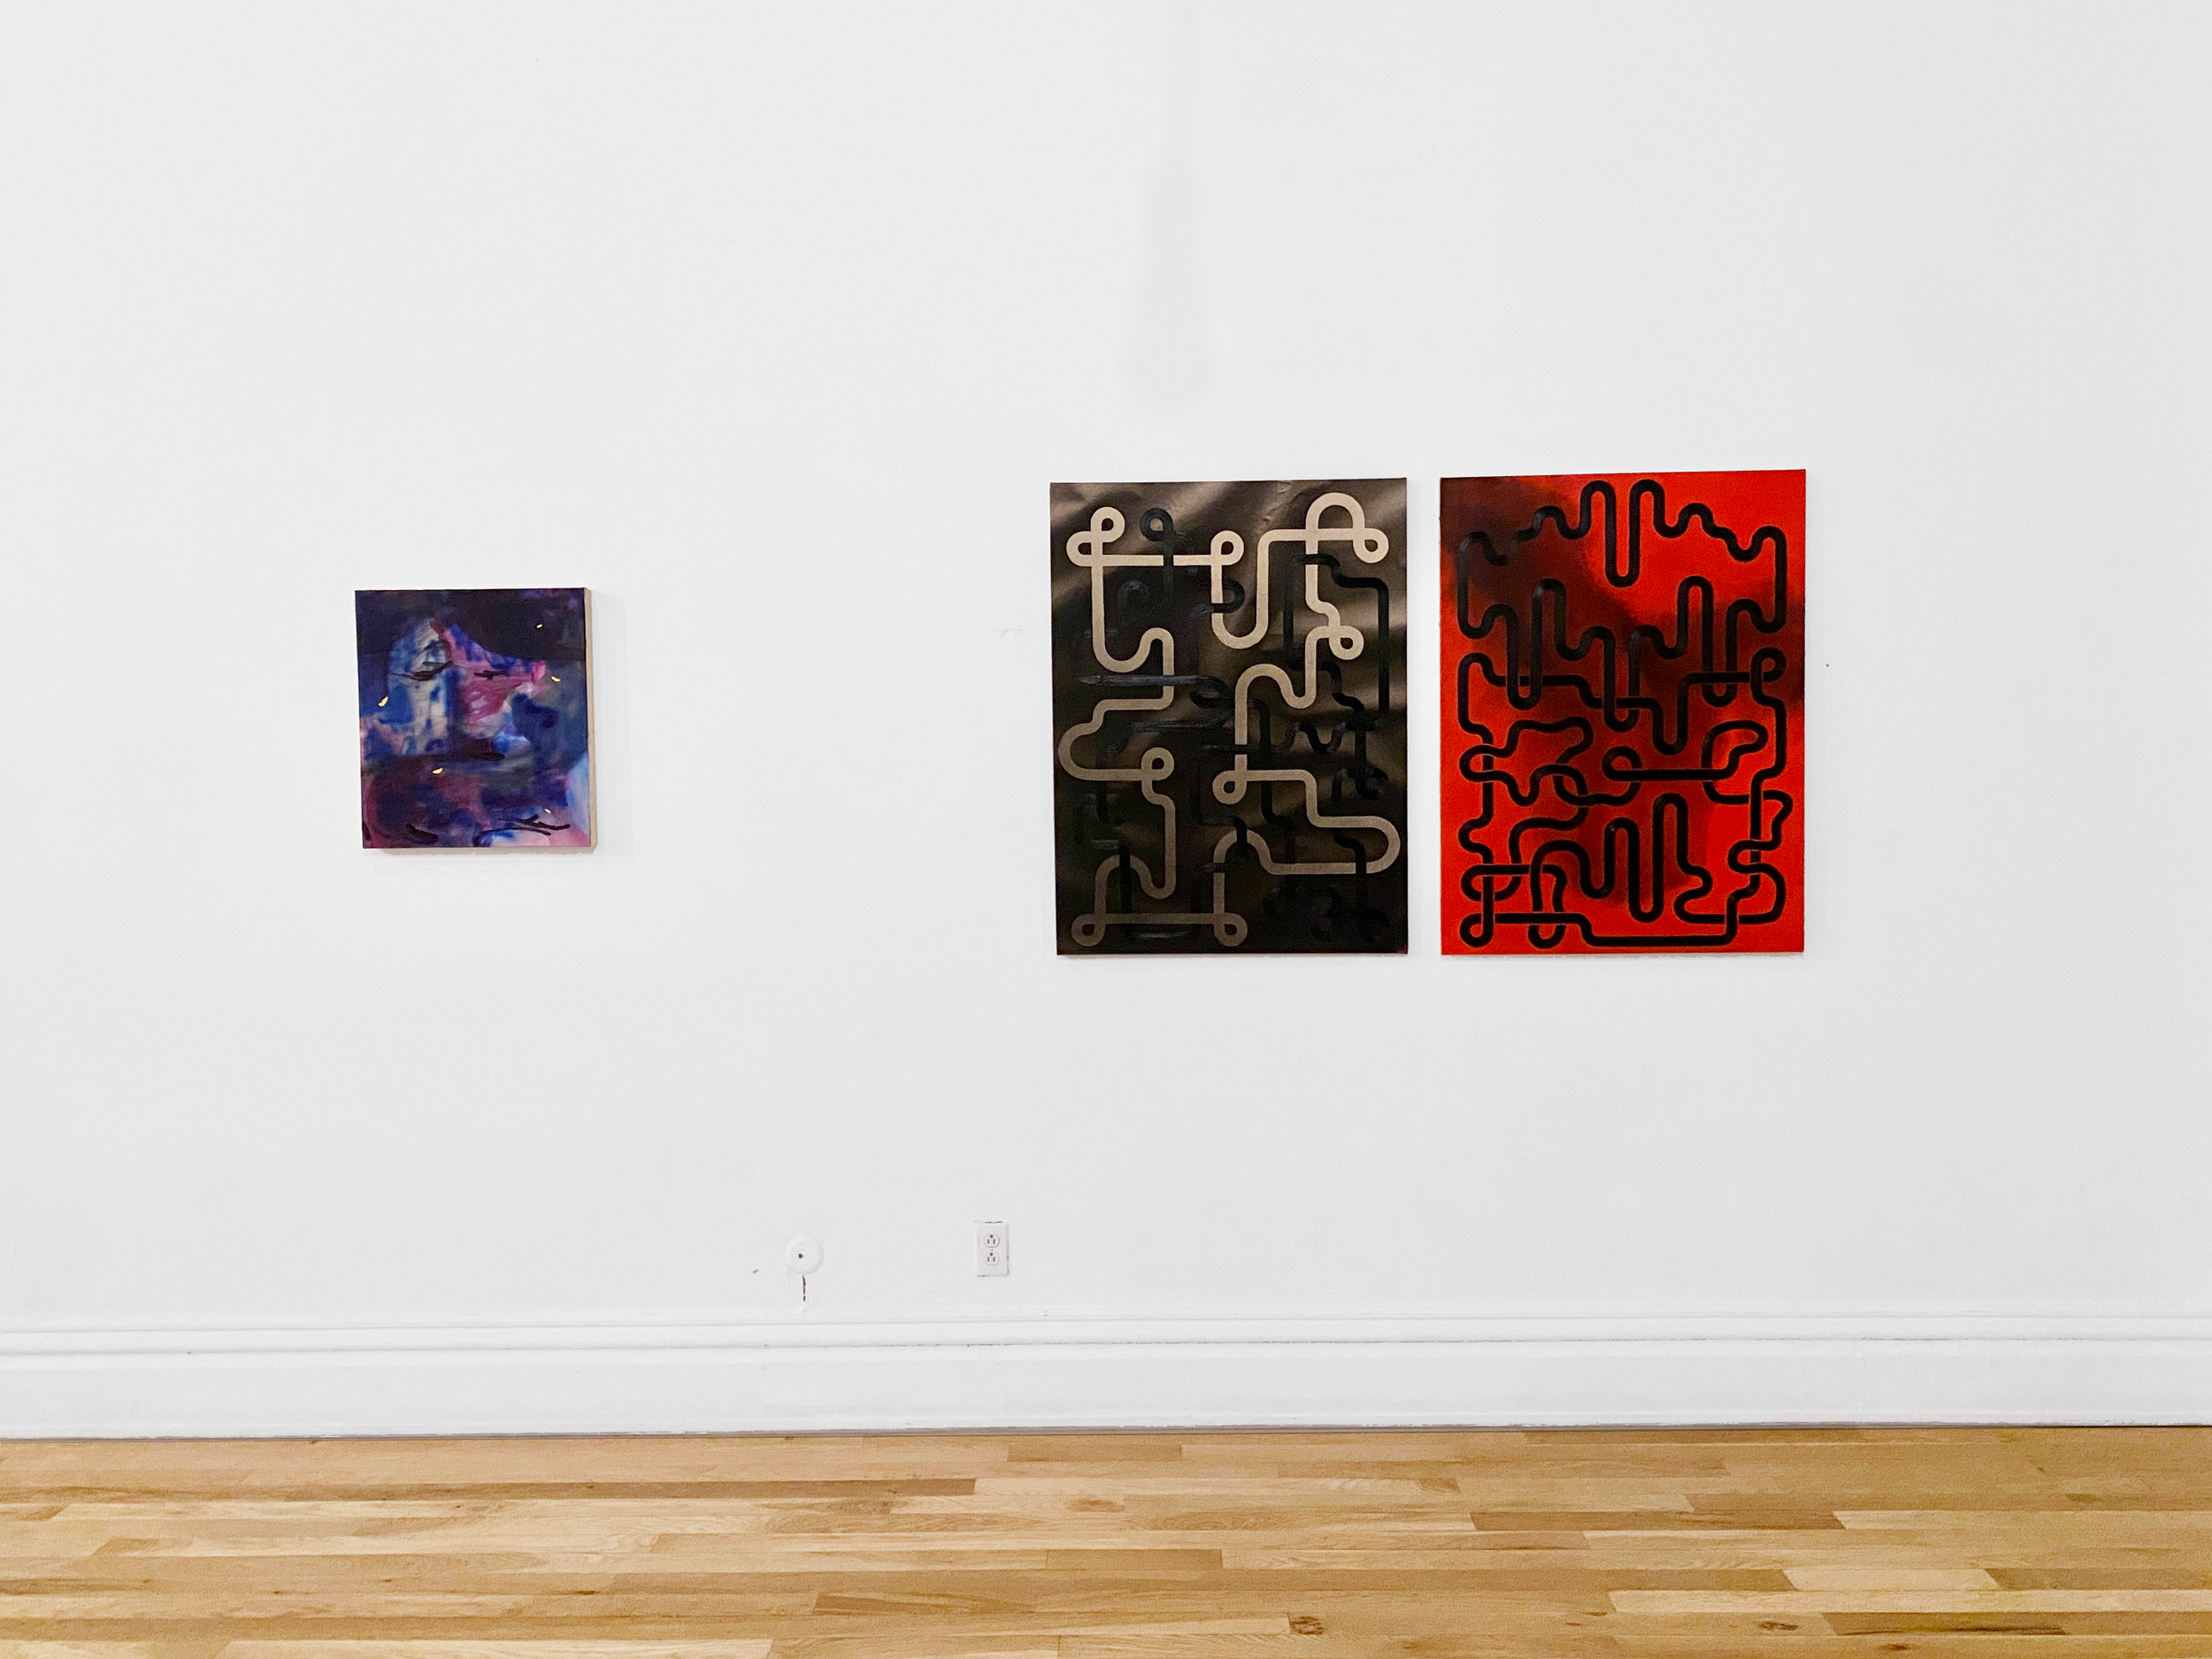  Installation View of Near Heat with John Burt Sanders at the Union Hall, Pittsburgh  